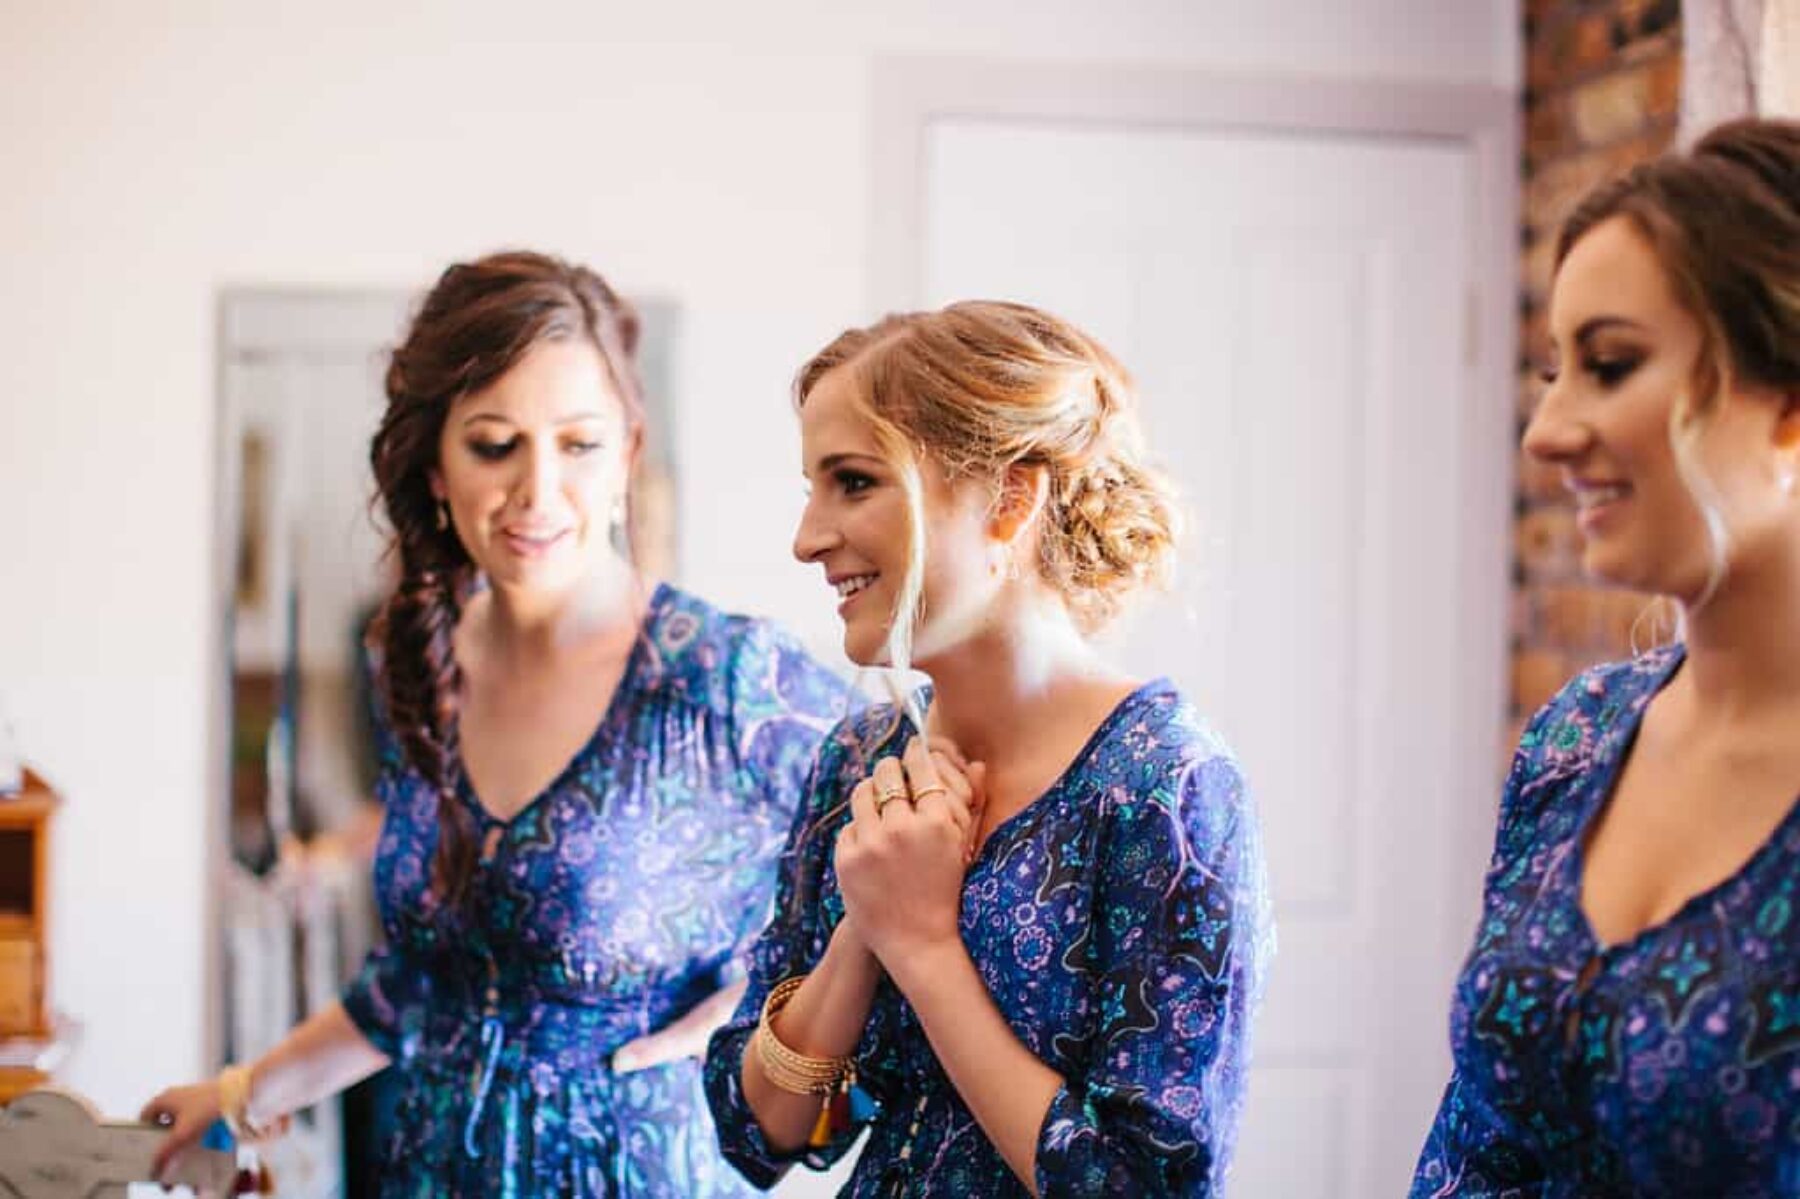 blue bridesmaid dresses by Spell Designs